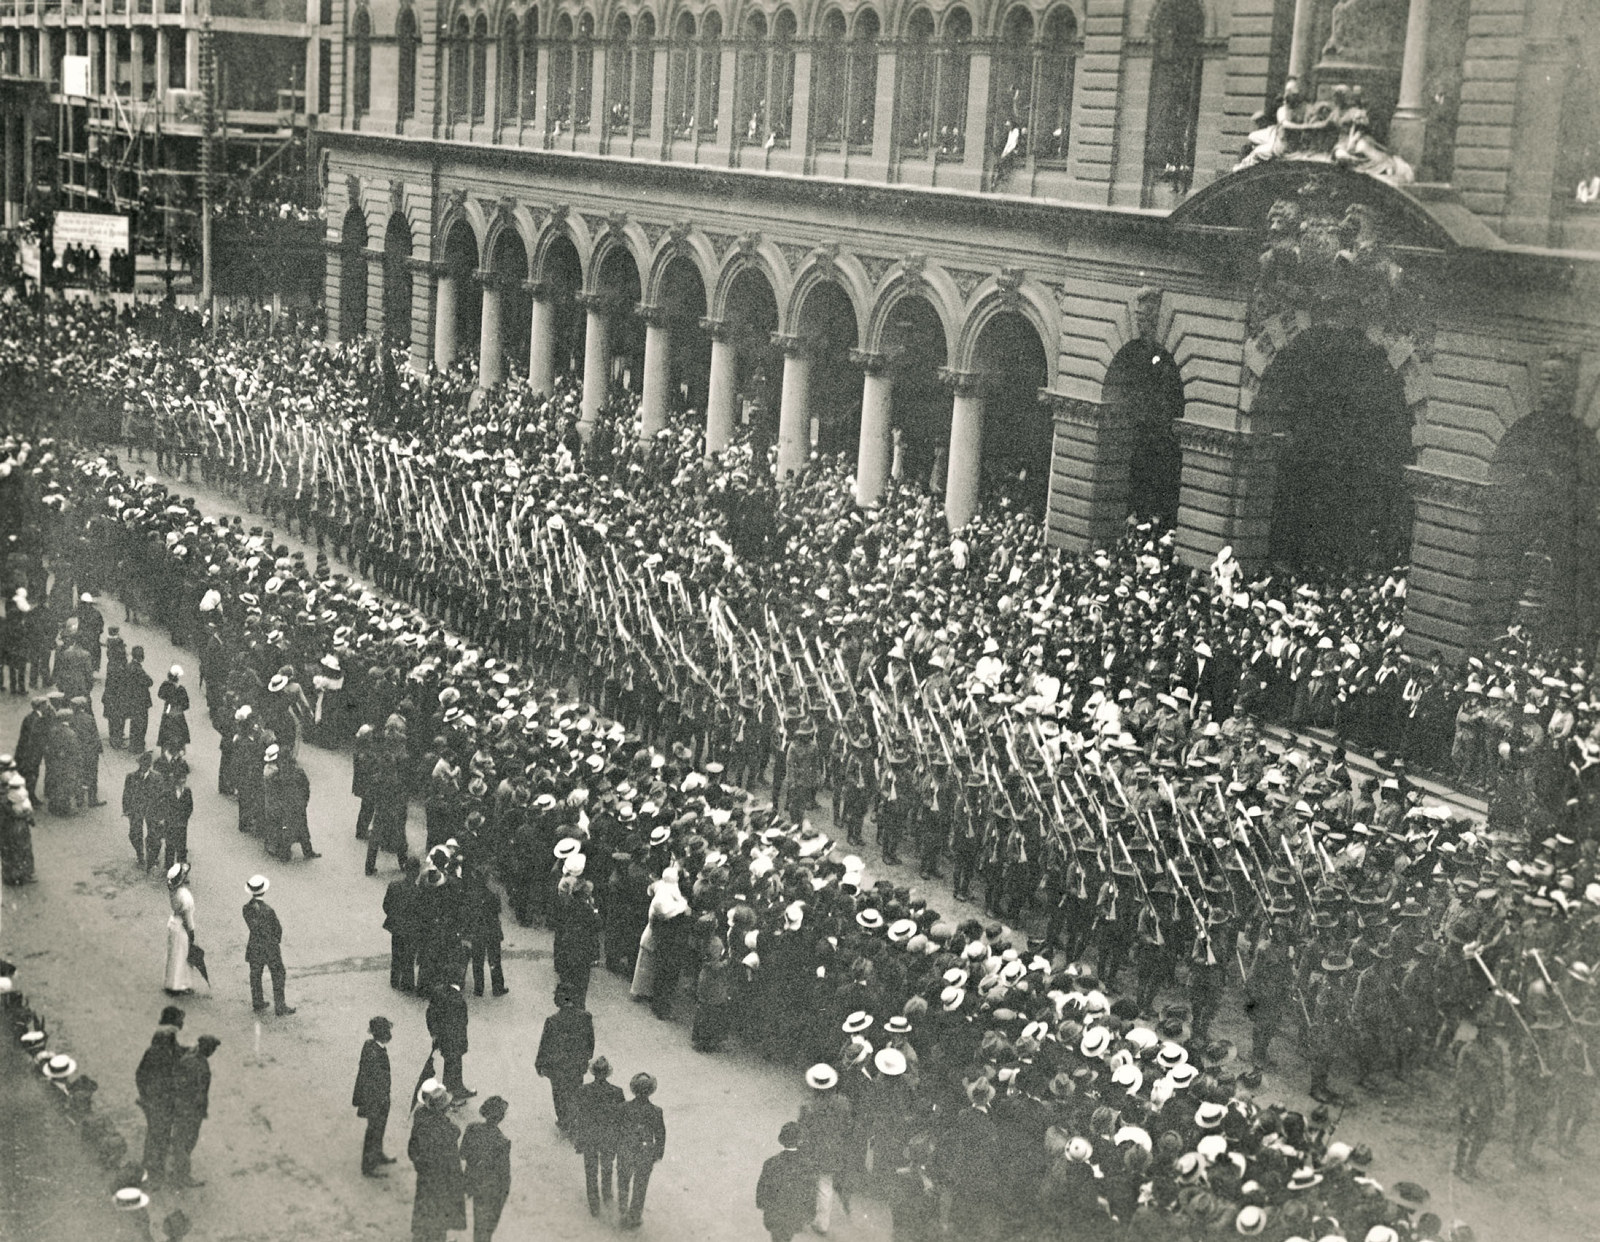 View of strret lined with crowds and troops marching down the centre of the street.